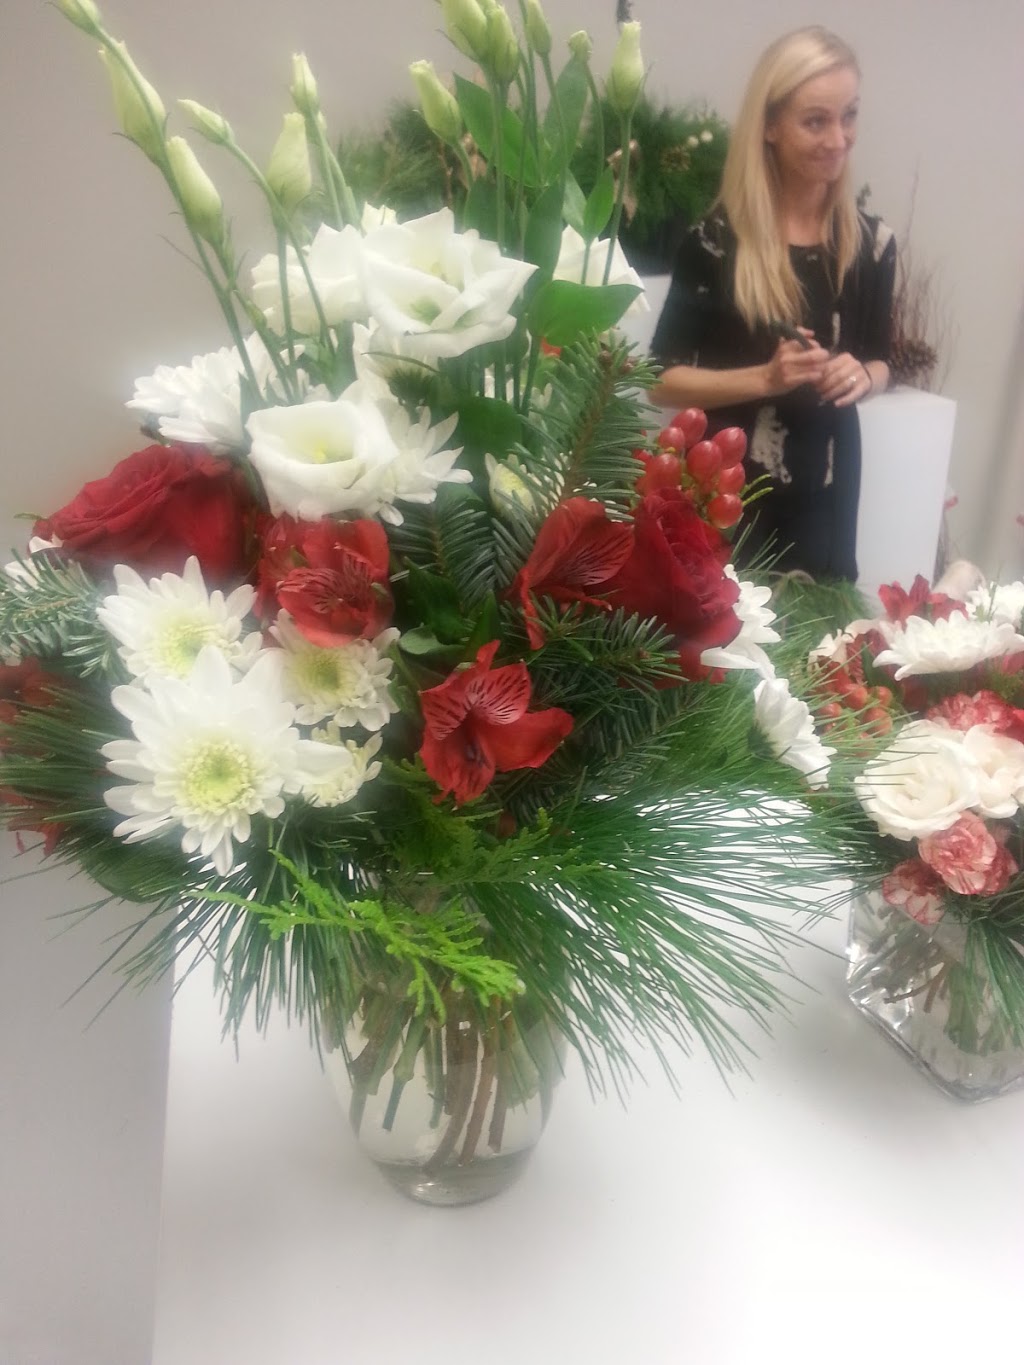 Bloomstar Bouquet | florist | 6455 Vipond Dr, Mississauga, ON L5T 1J9, Canada | 9053660800 OR +1 905-366-0800